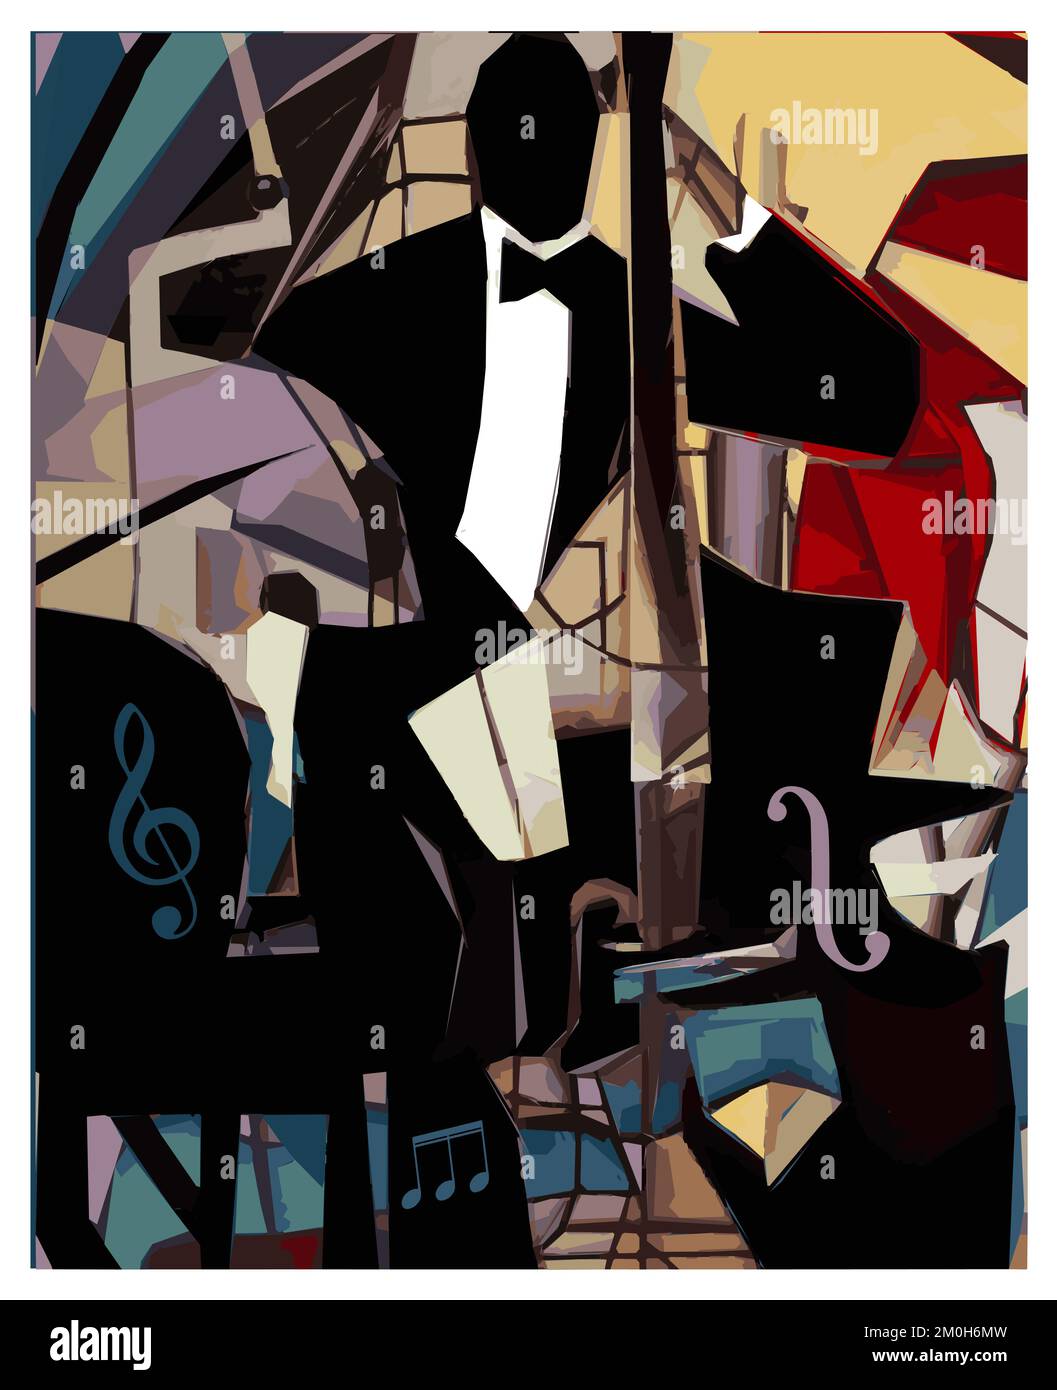 Contemporary art abstract original composition about jazz - cubism inspiration - vector illustration (Ideal for printing, poster or wallpaper, house d Stock Vector